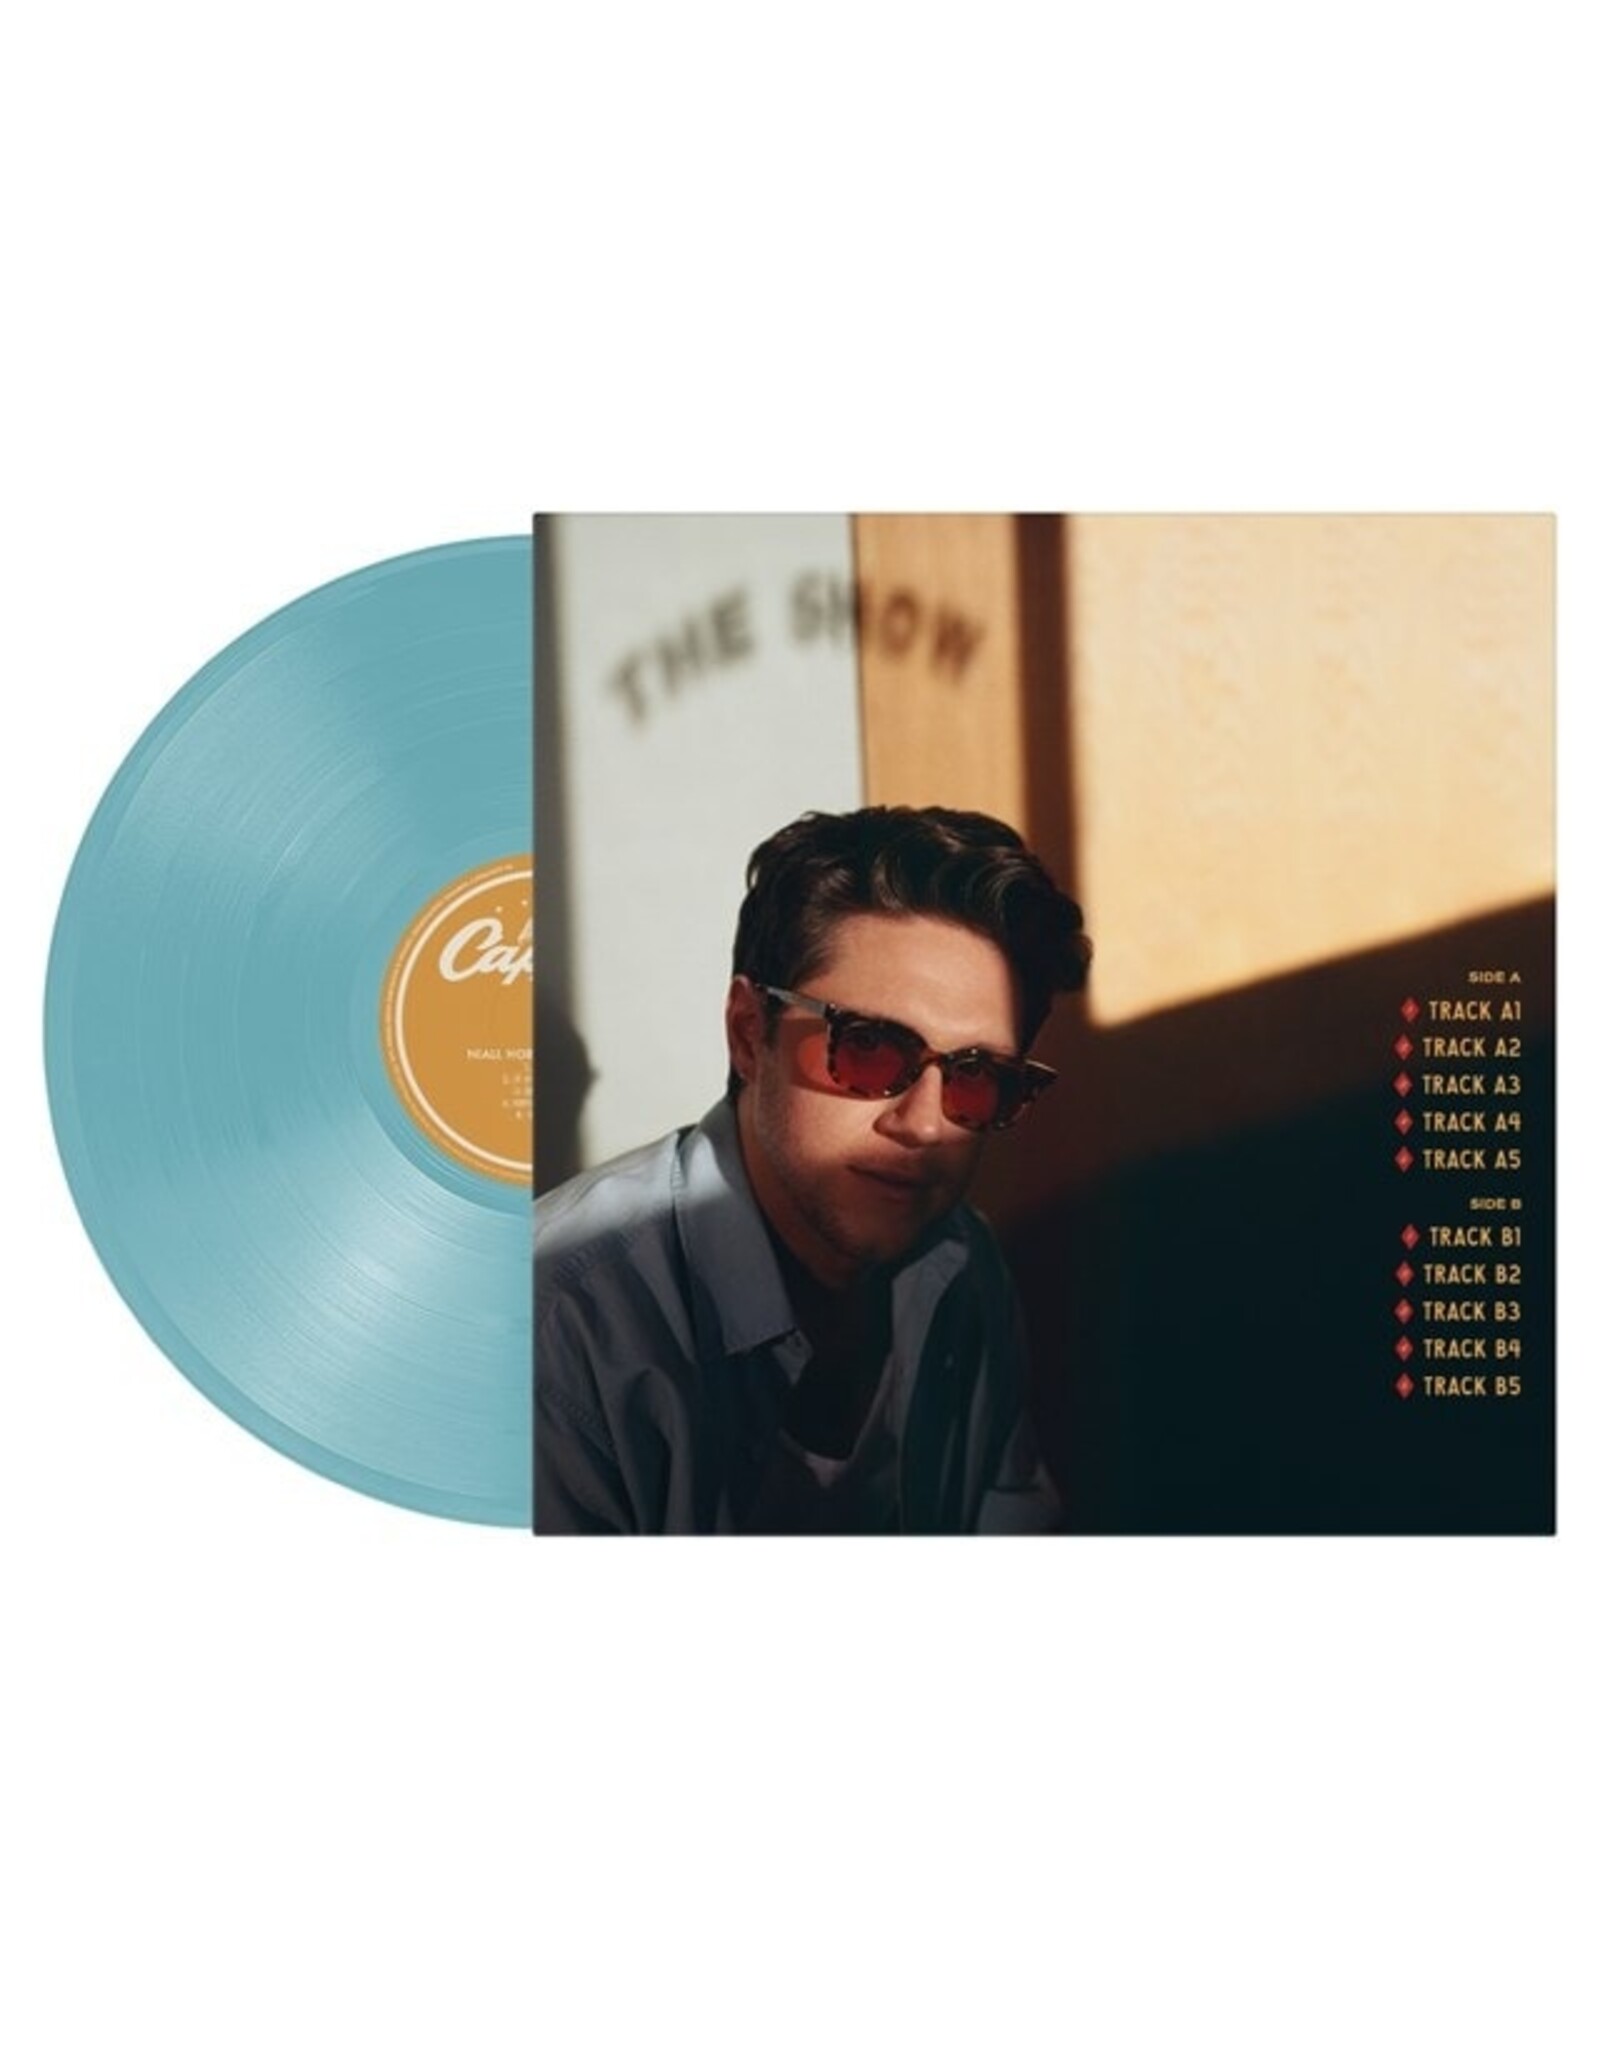 Niall Horan - The Show (Exclusive Blue Vinyl)